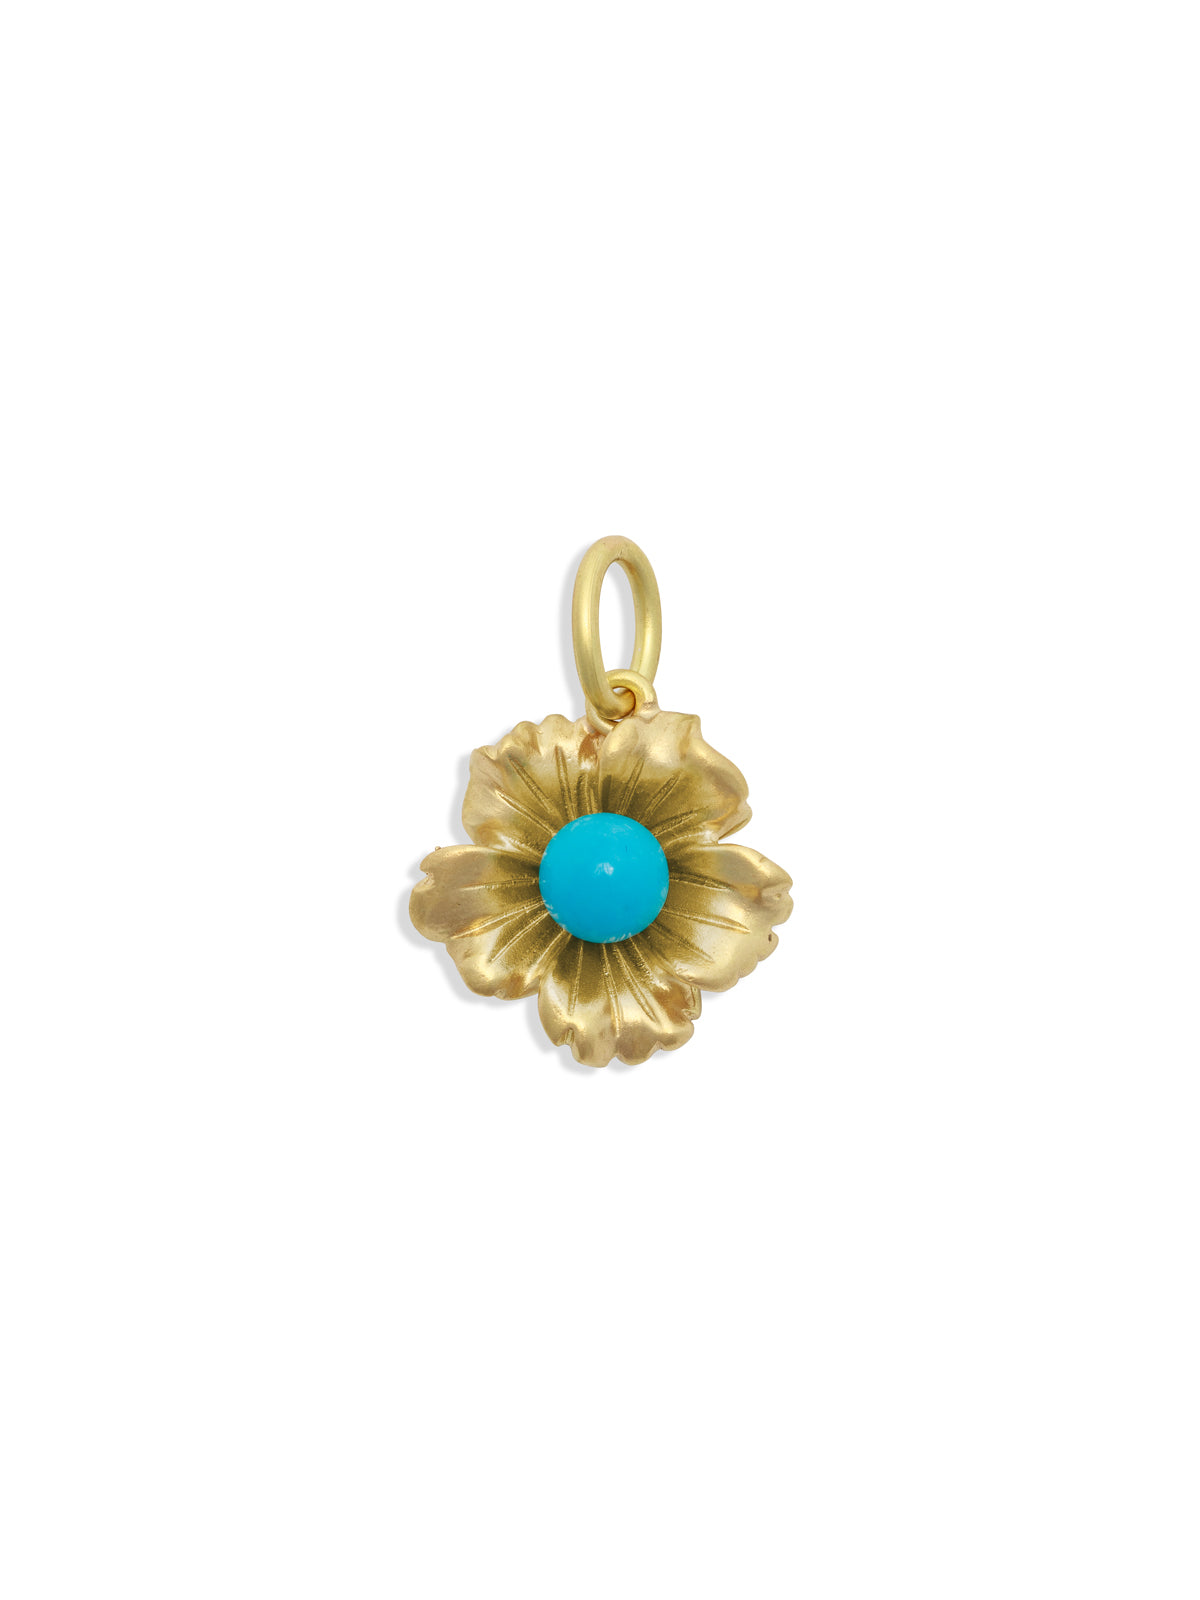 Turquoise Tropical Flower Yellow Gold Charm